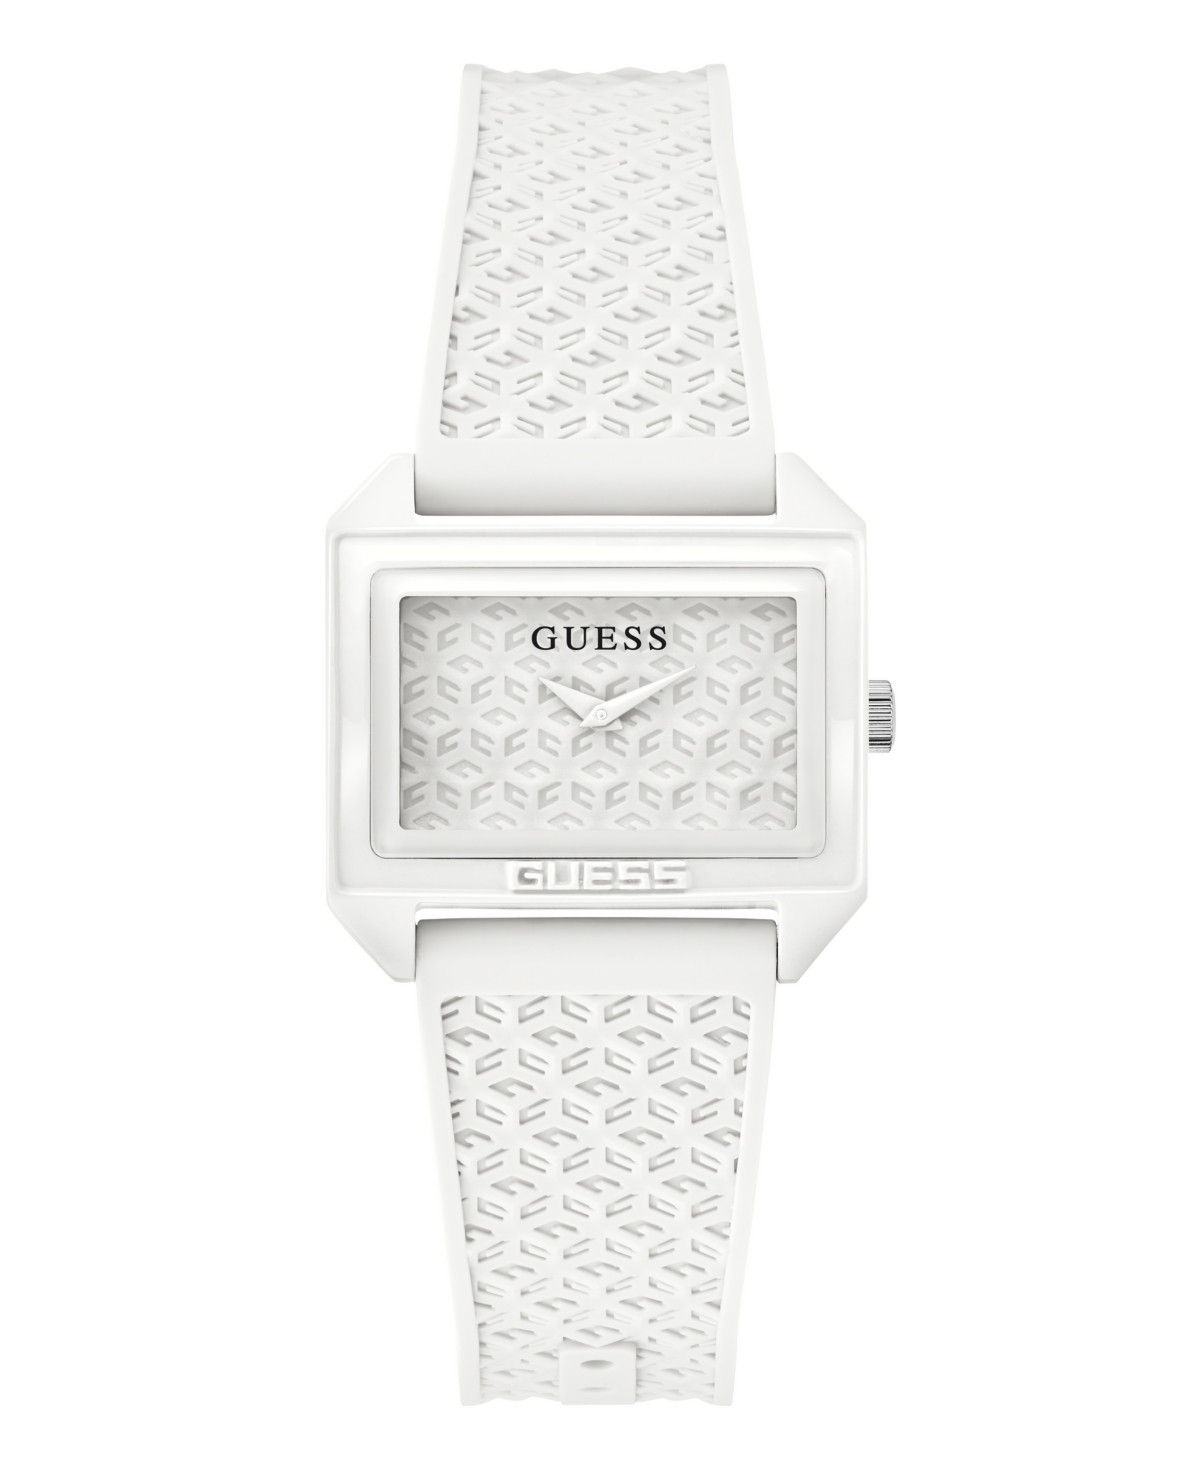 Guess Women's Analog White Silicone Watch 32mm